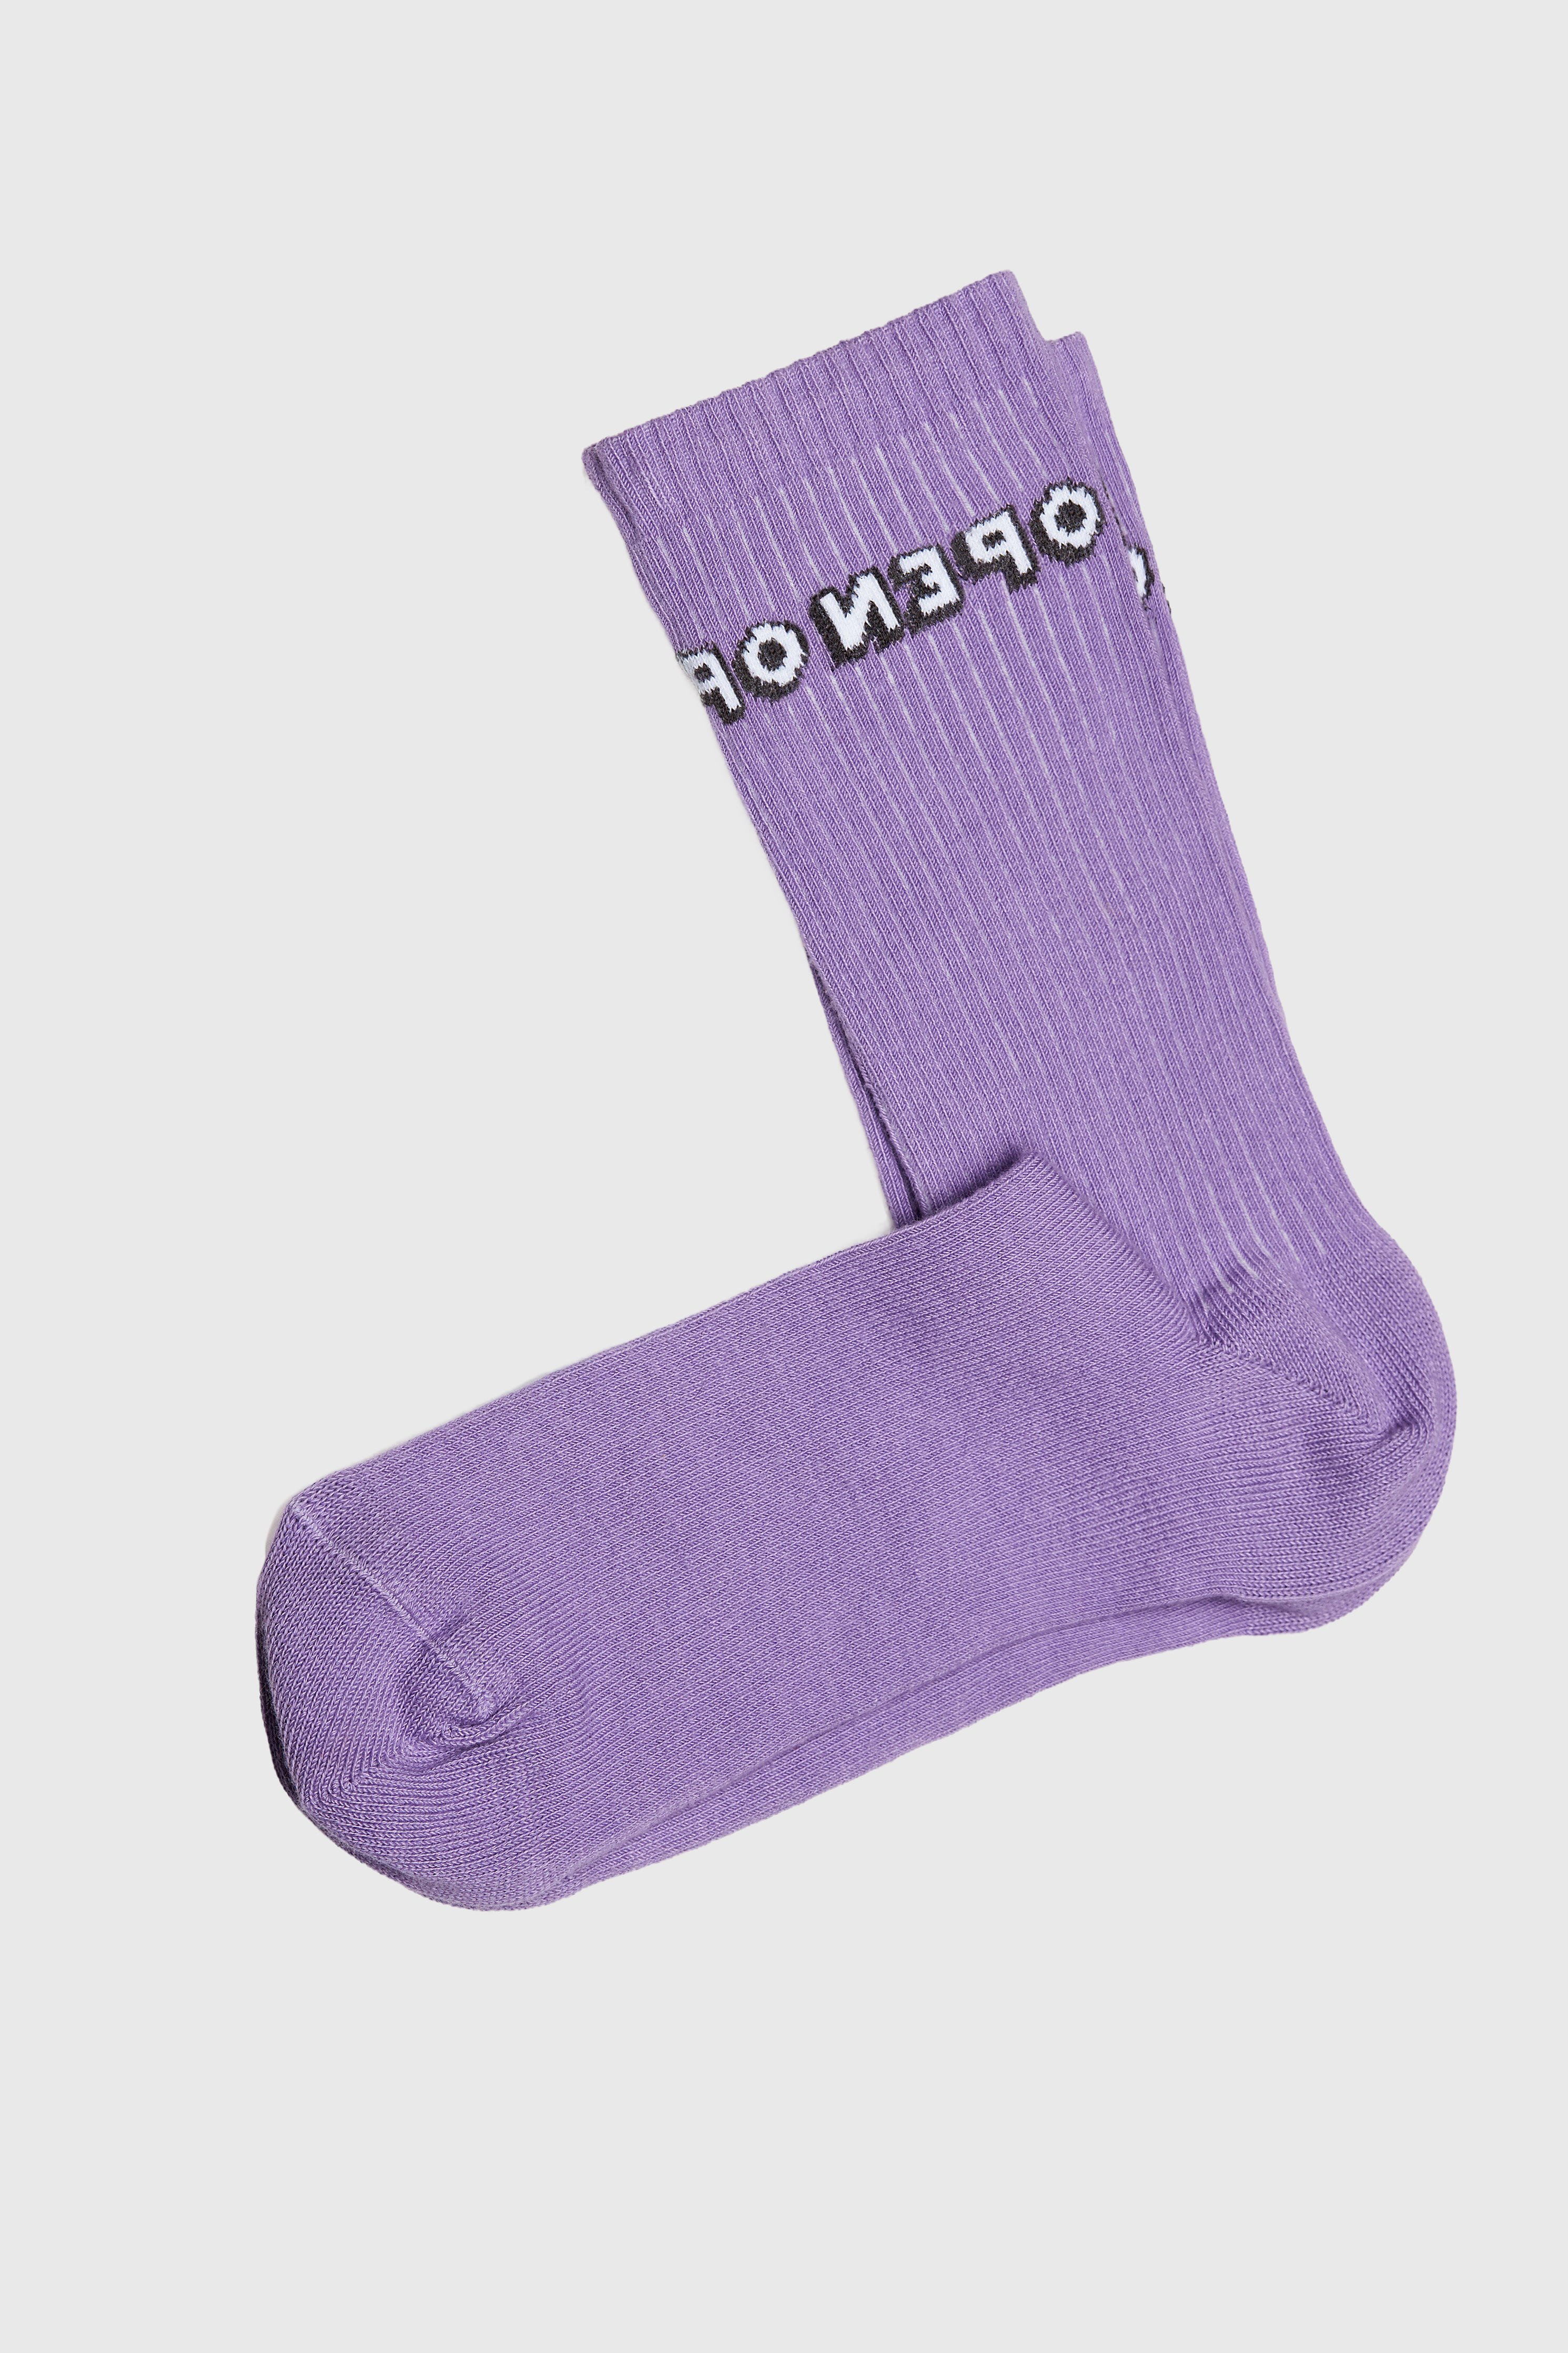 Purple Cotton-Blend socks from Swiss Socks Brand Chaton Gonflable.